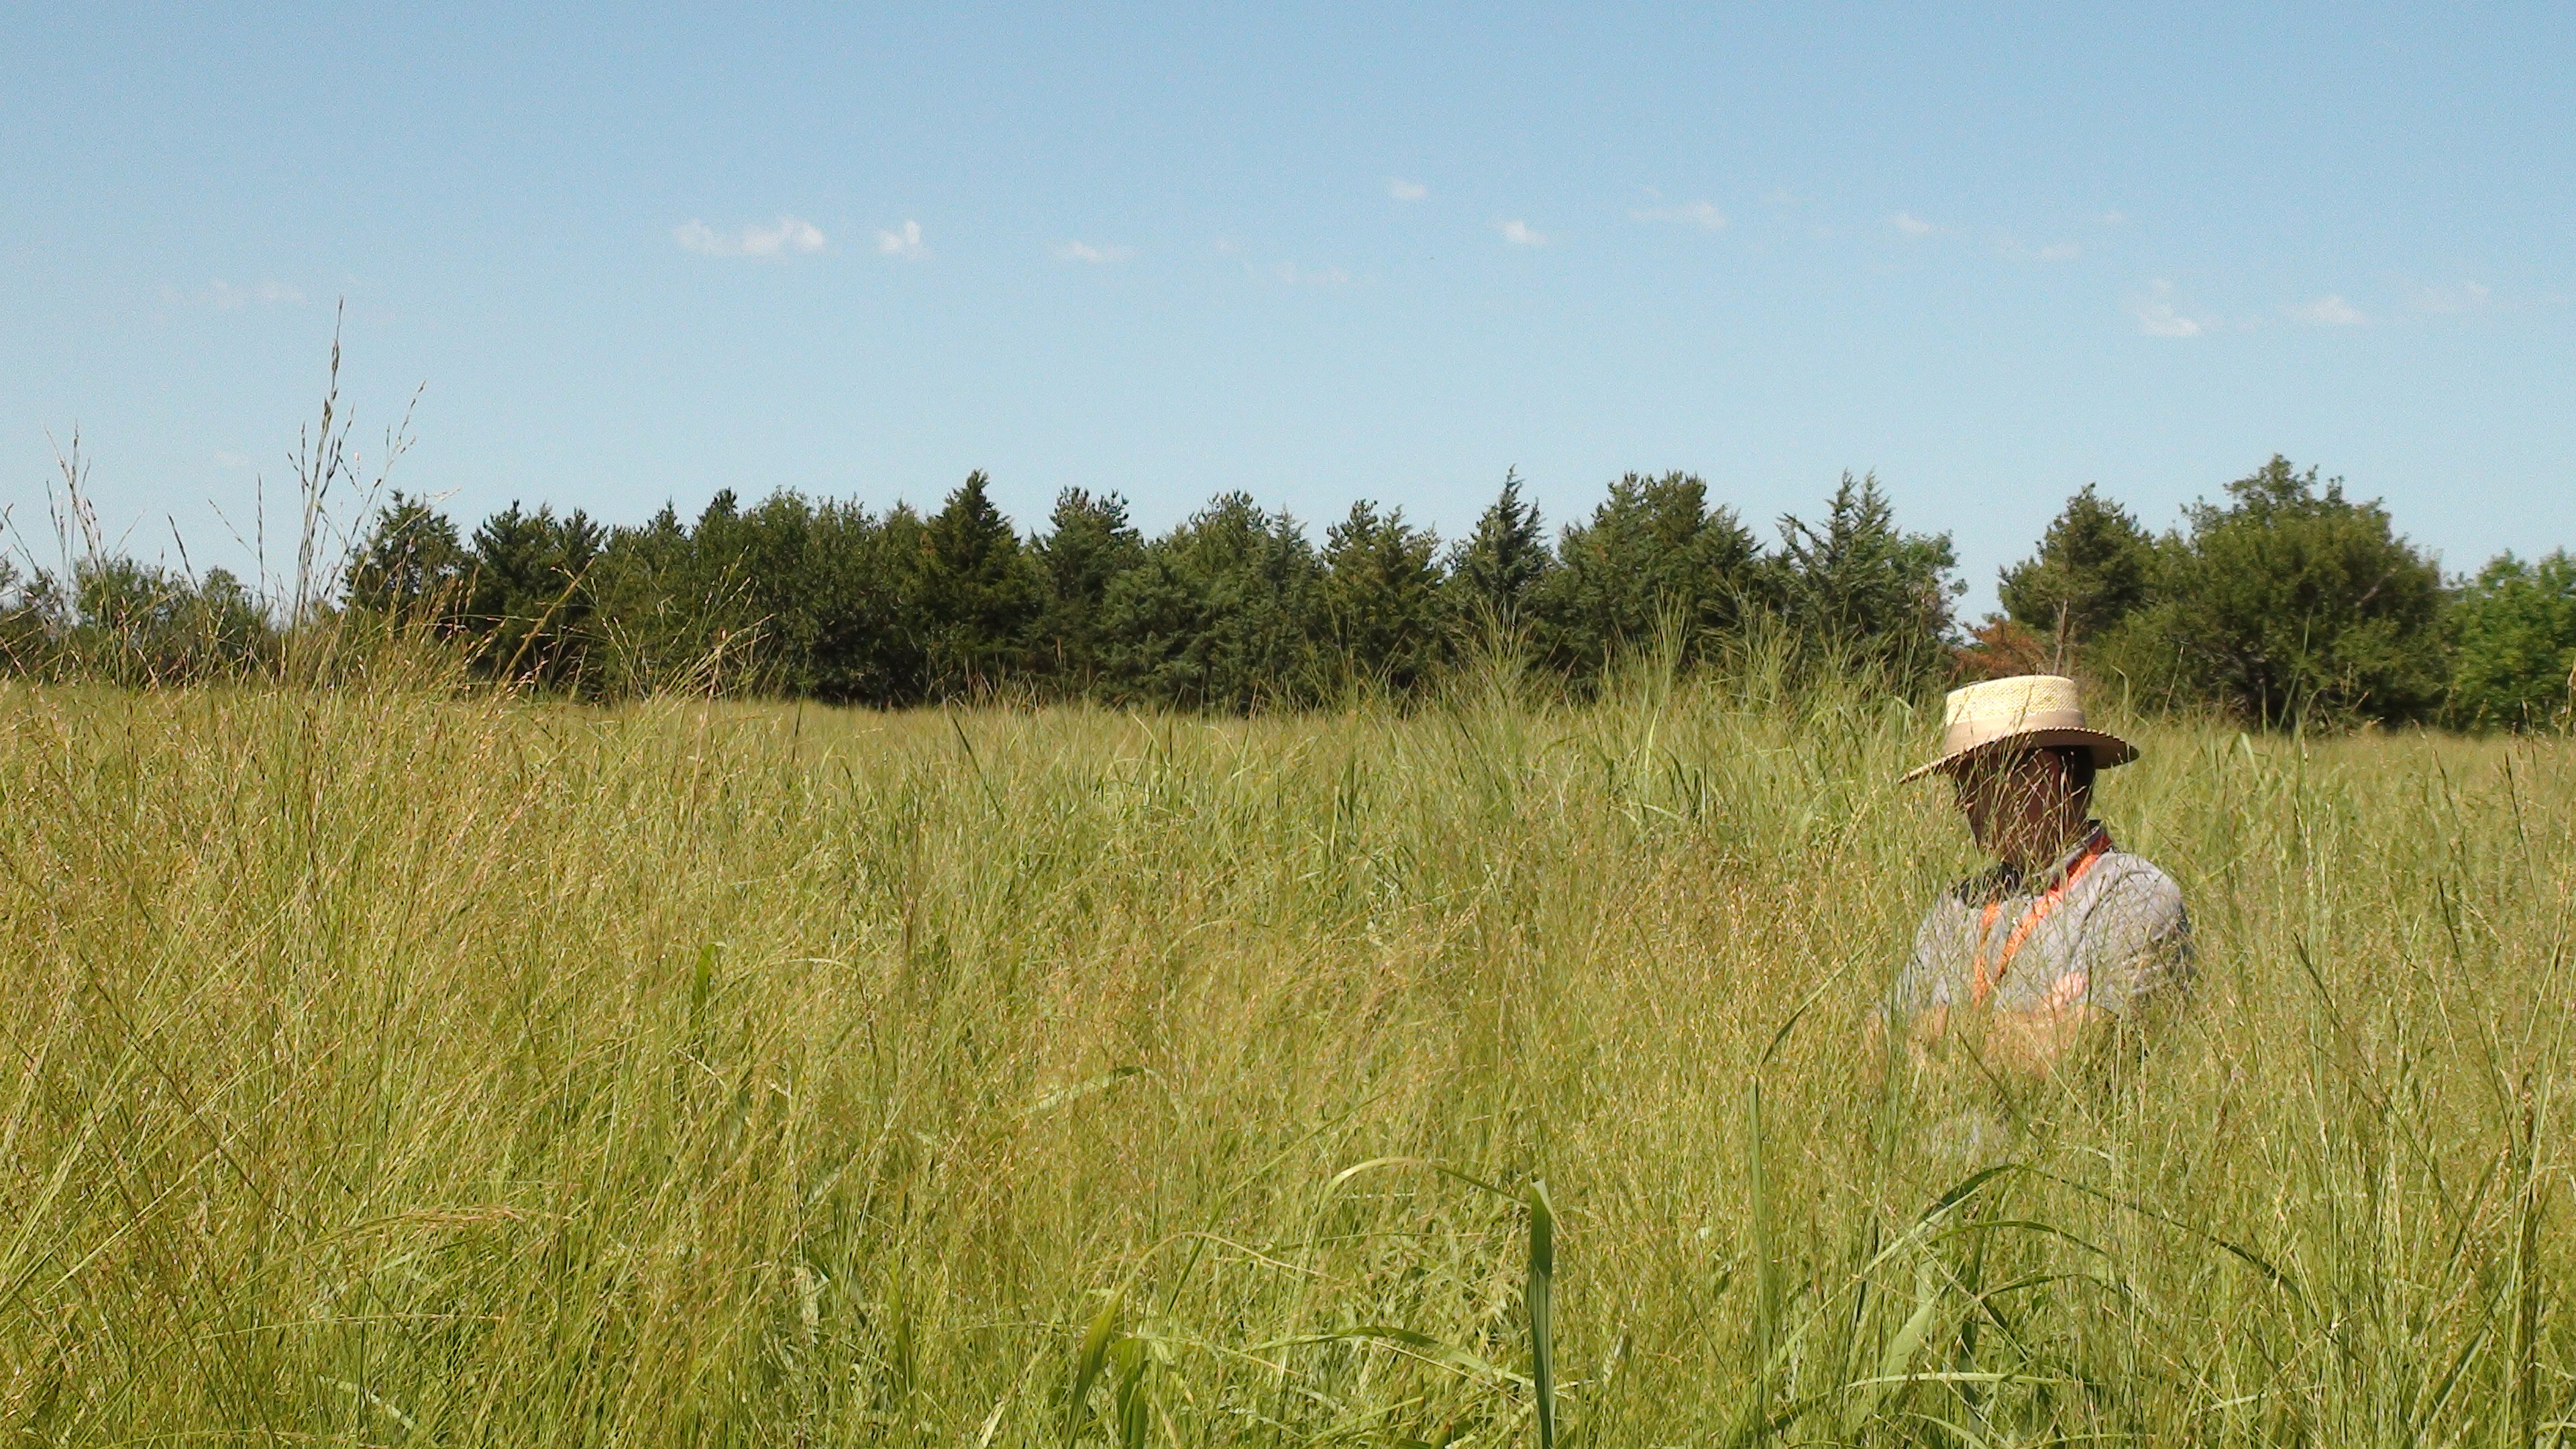 A man standing in a field of switchgrass.